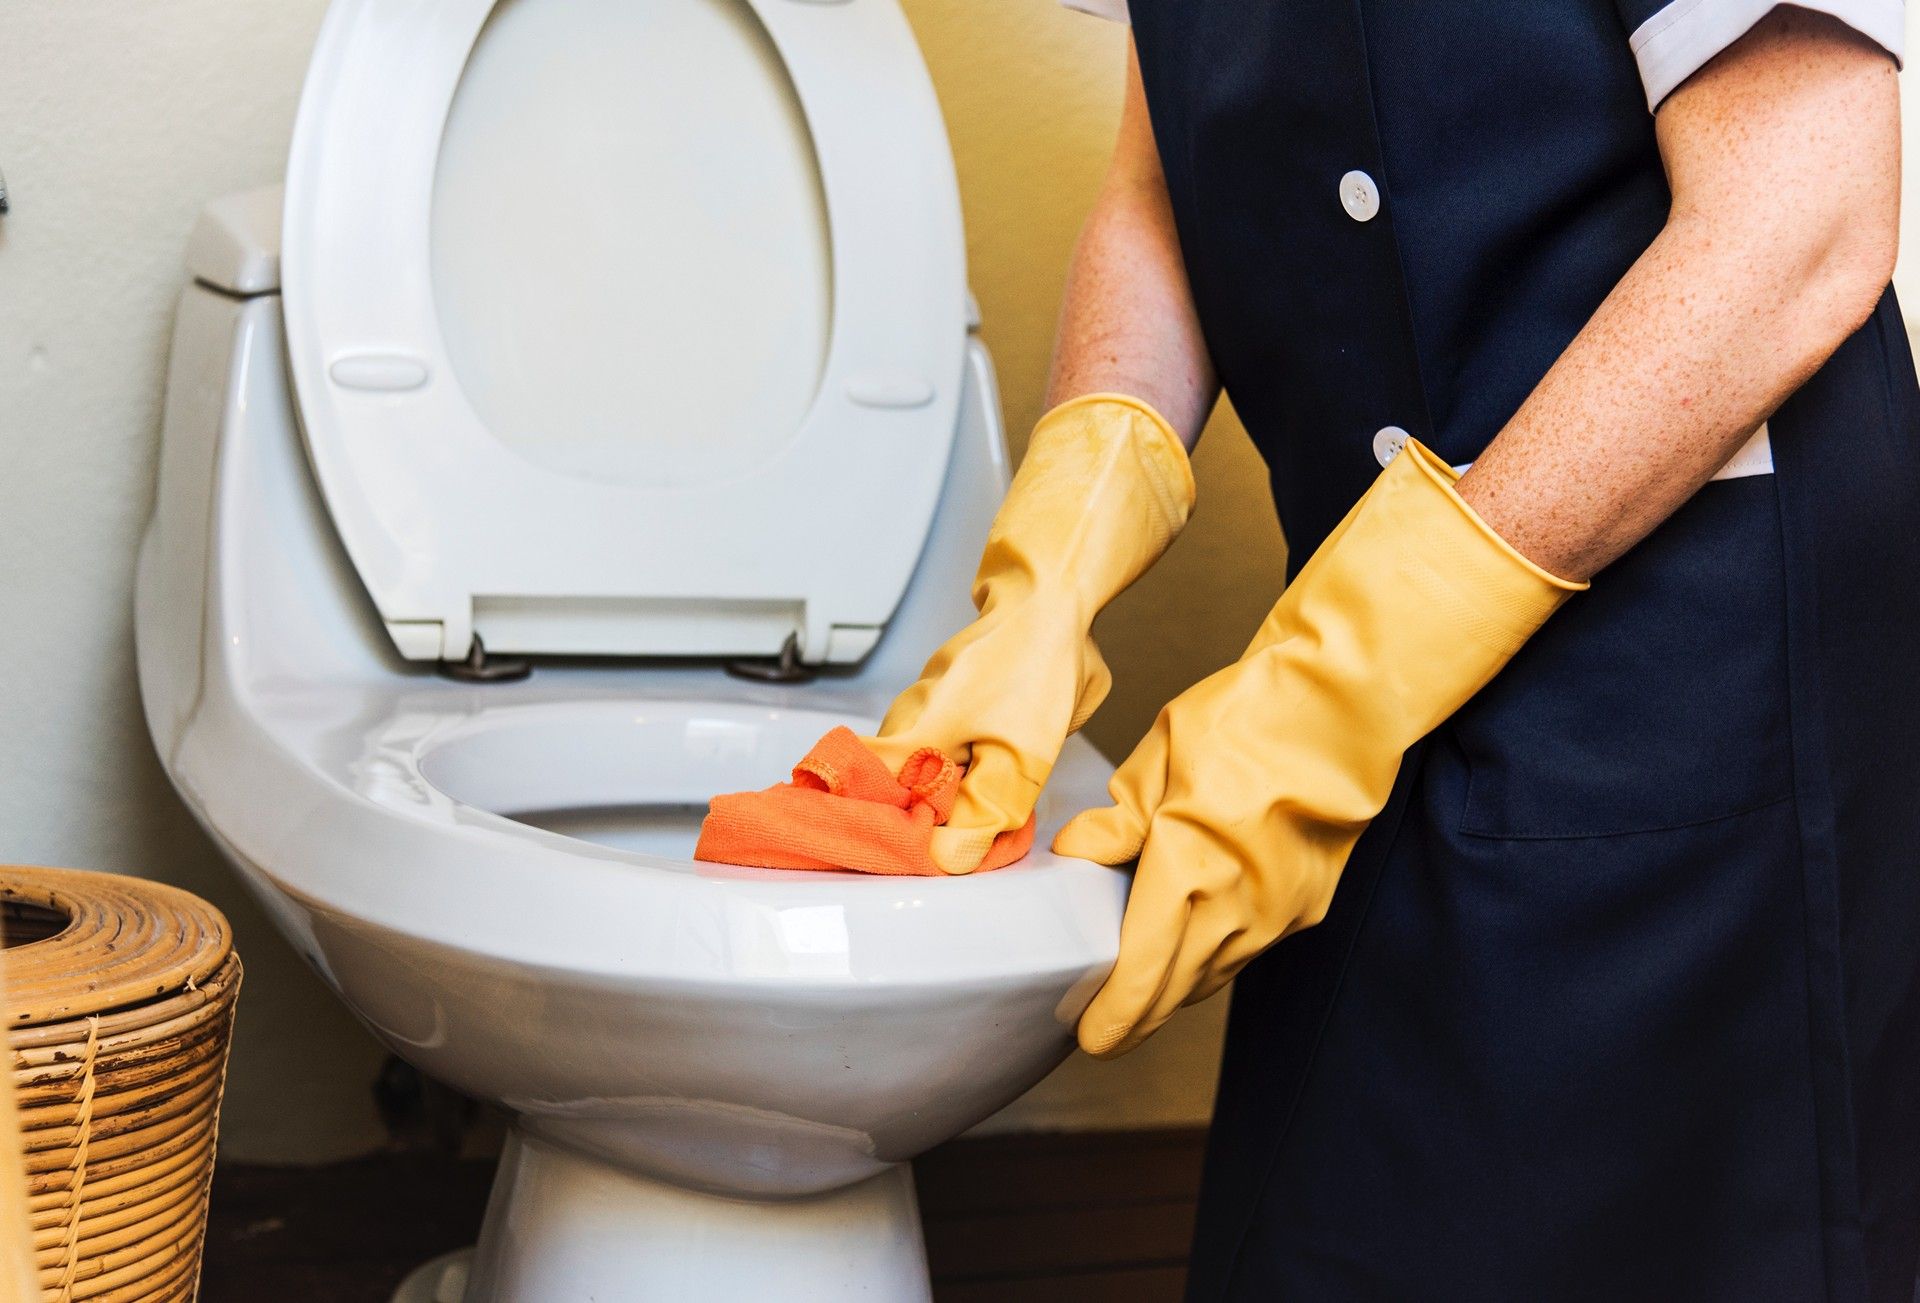 Restrooms are part of our commercial cleaning service.